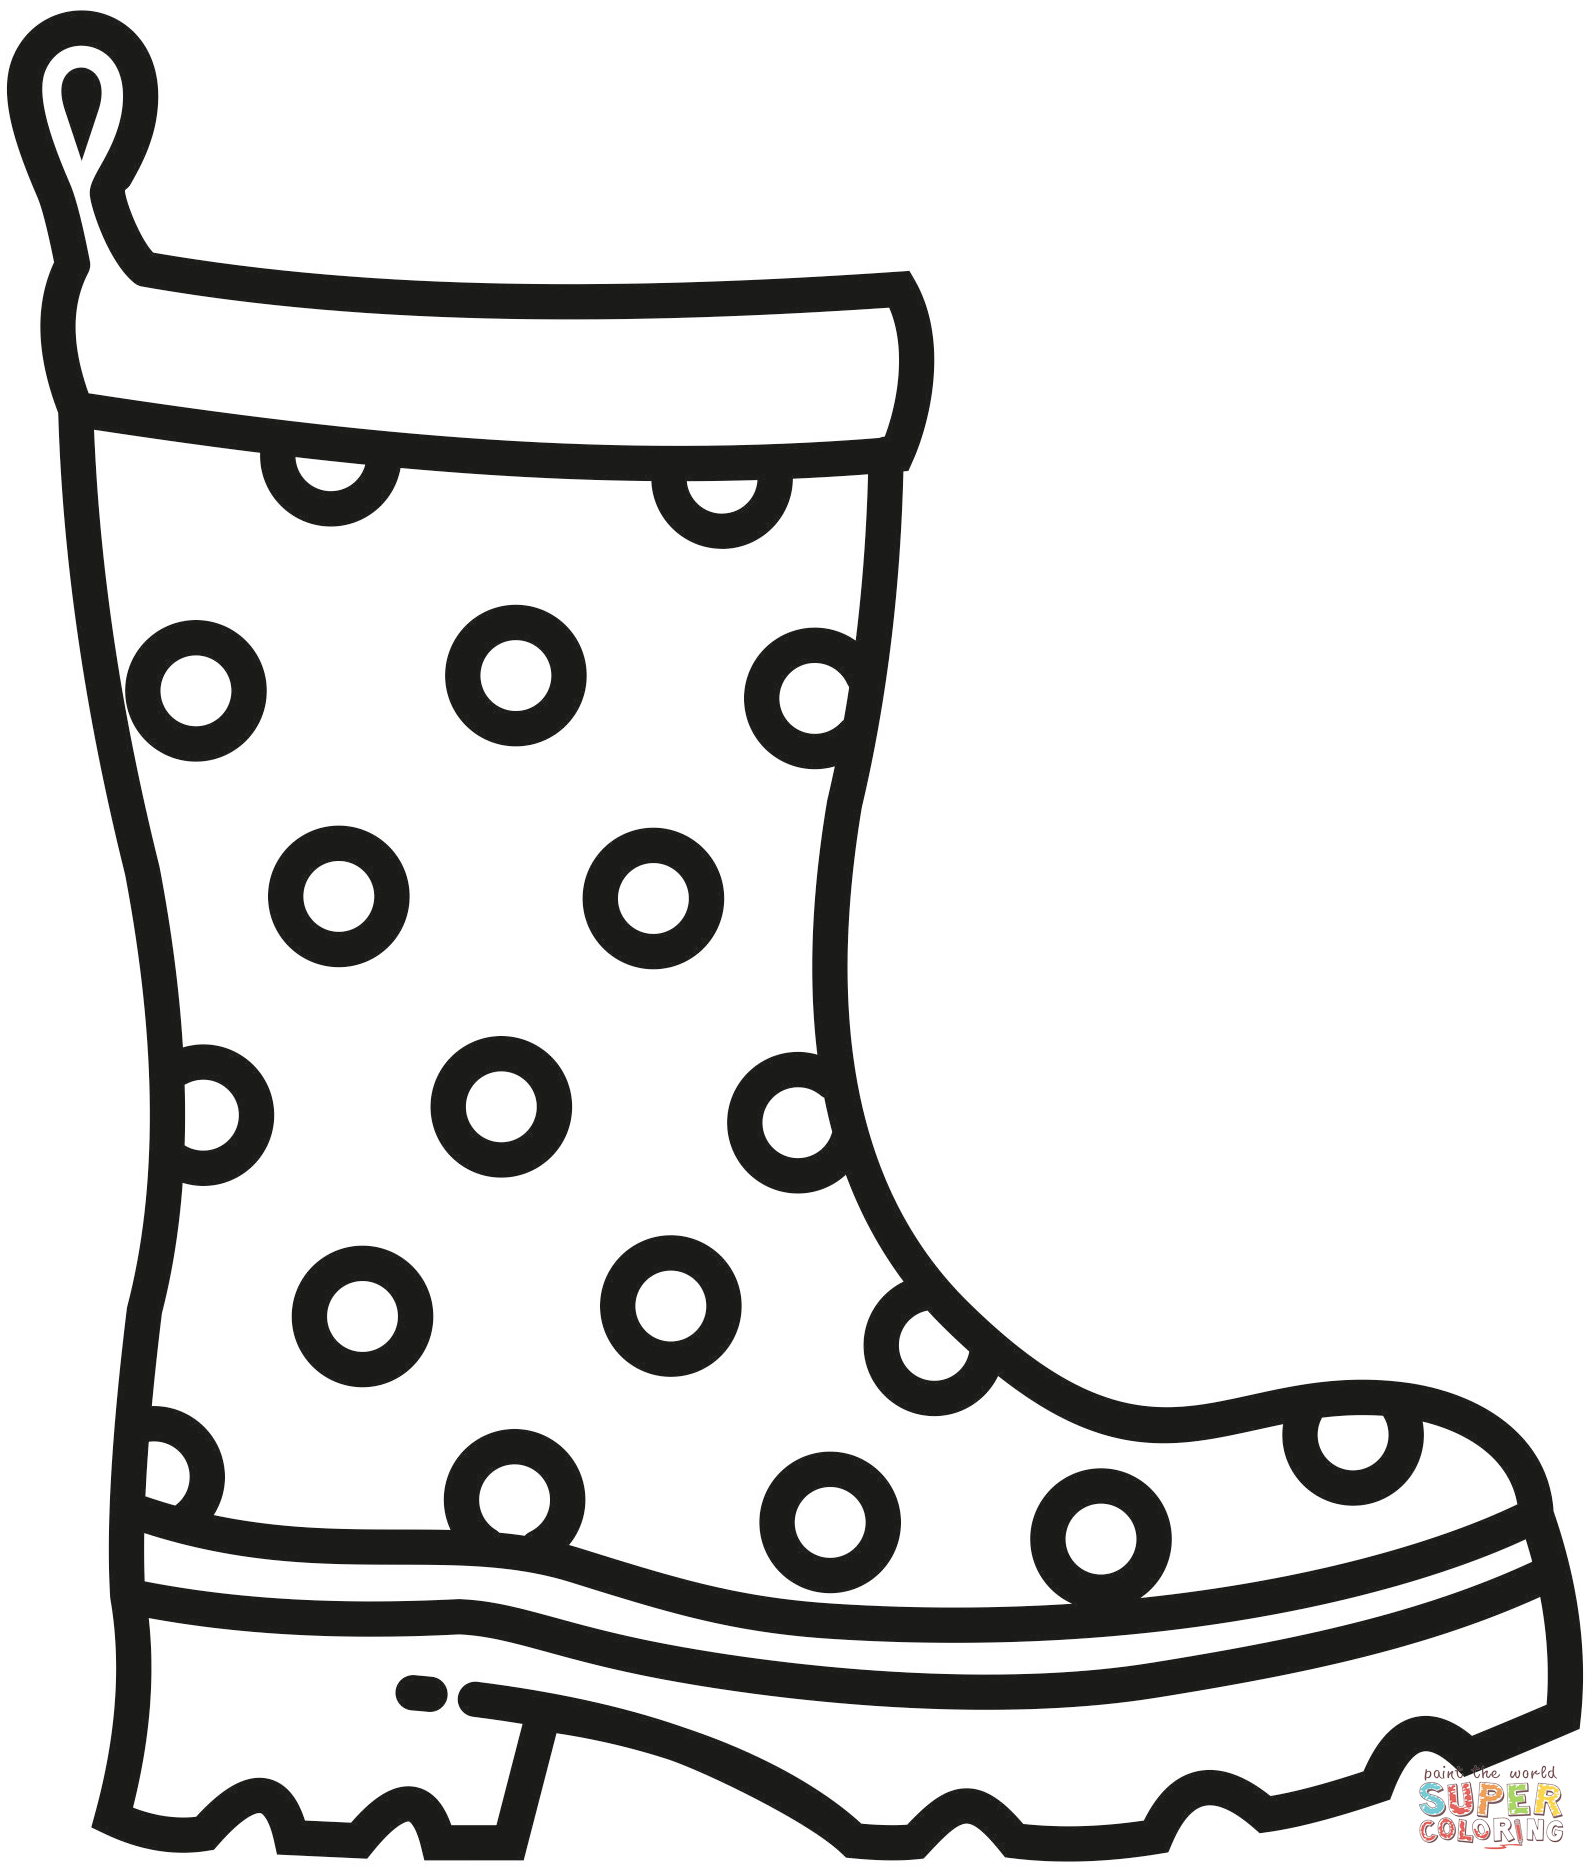 Rain boots coloring page free printable coloring pages